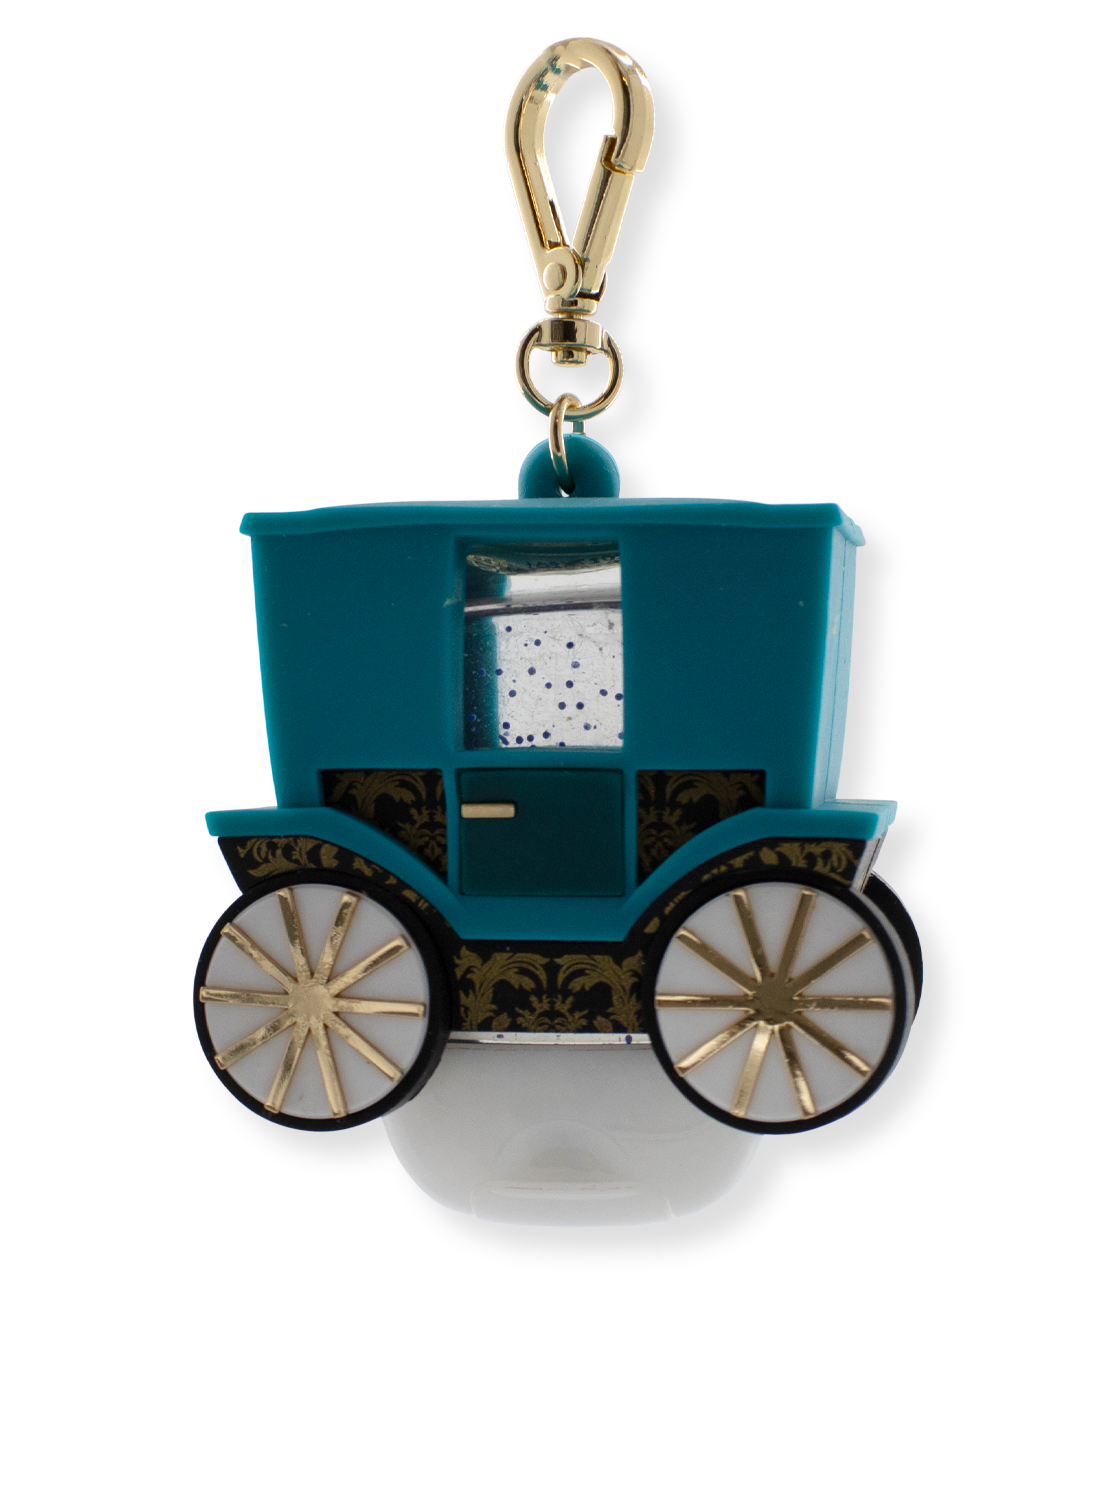 Pendant for hand disinfection gel - Bridgerton - Carriage - Limited Edition